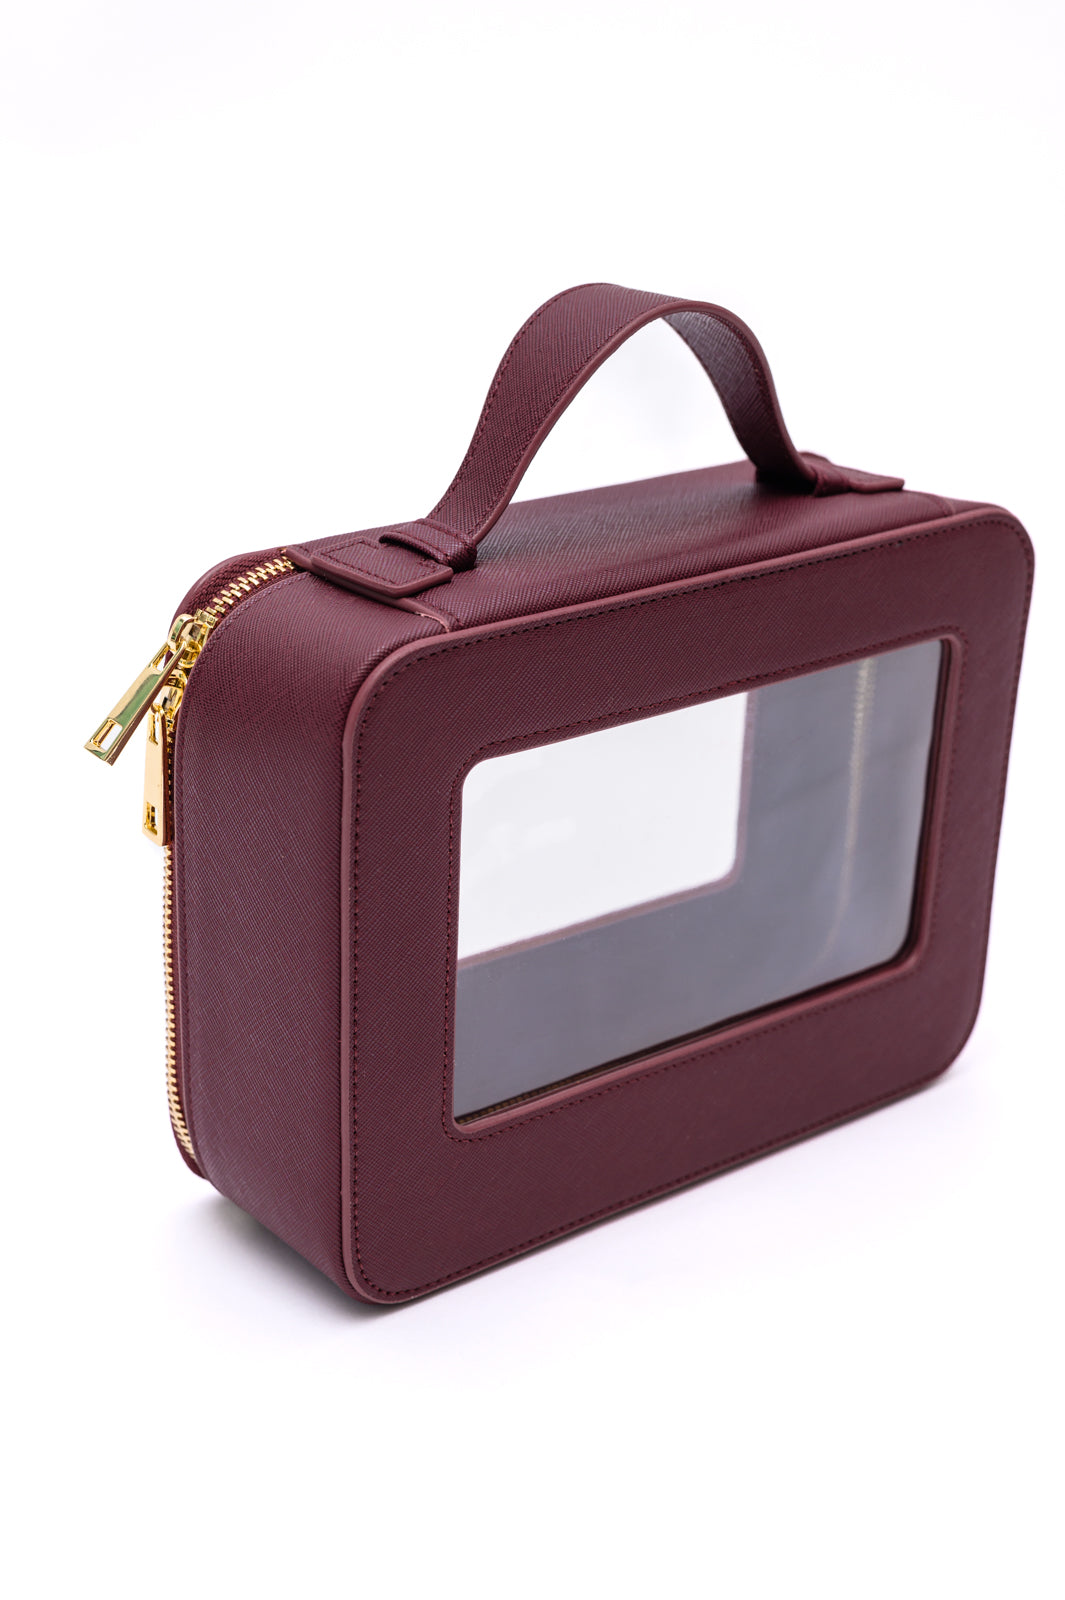 PU Leather Travel Cosmetic Case in Wine-Womens-OS-mercuryfoodservice Shop for Women & Kids